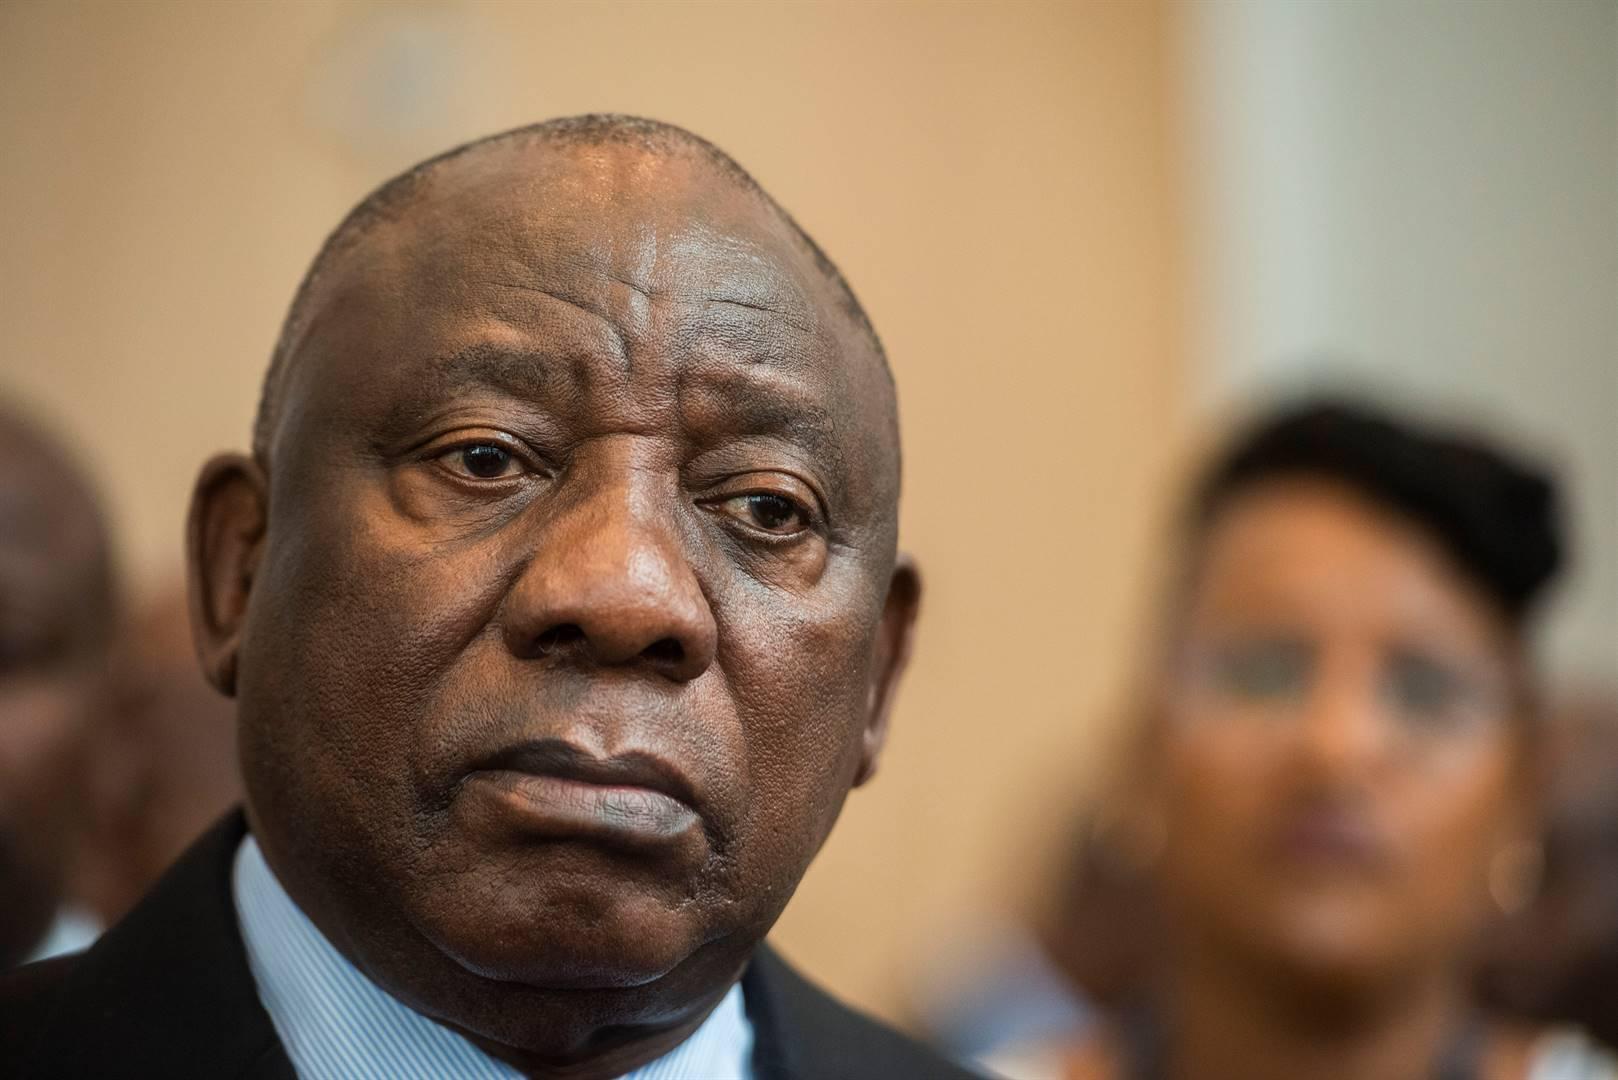 Ramaphosa extends 'thoughts and prayers' to families of those who died in cholera outbreak